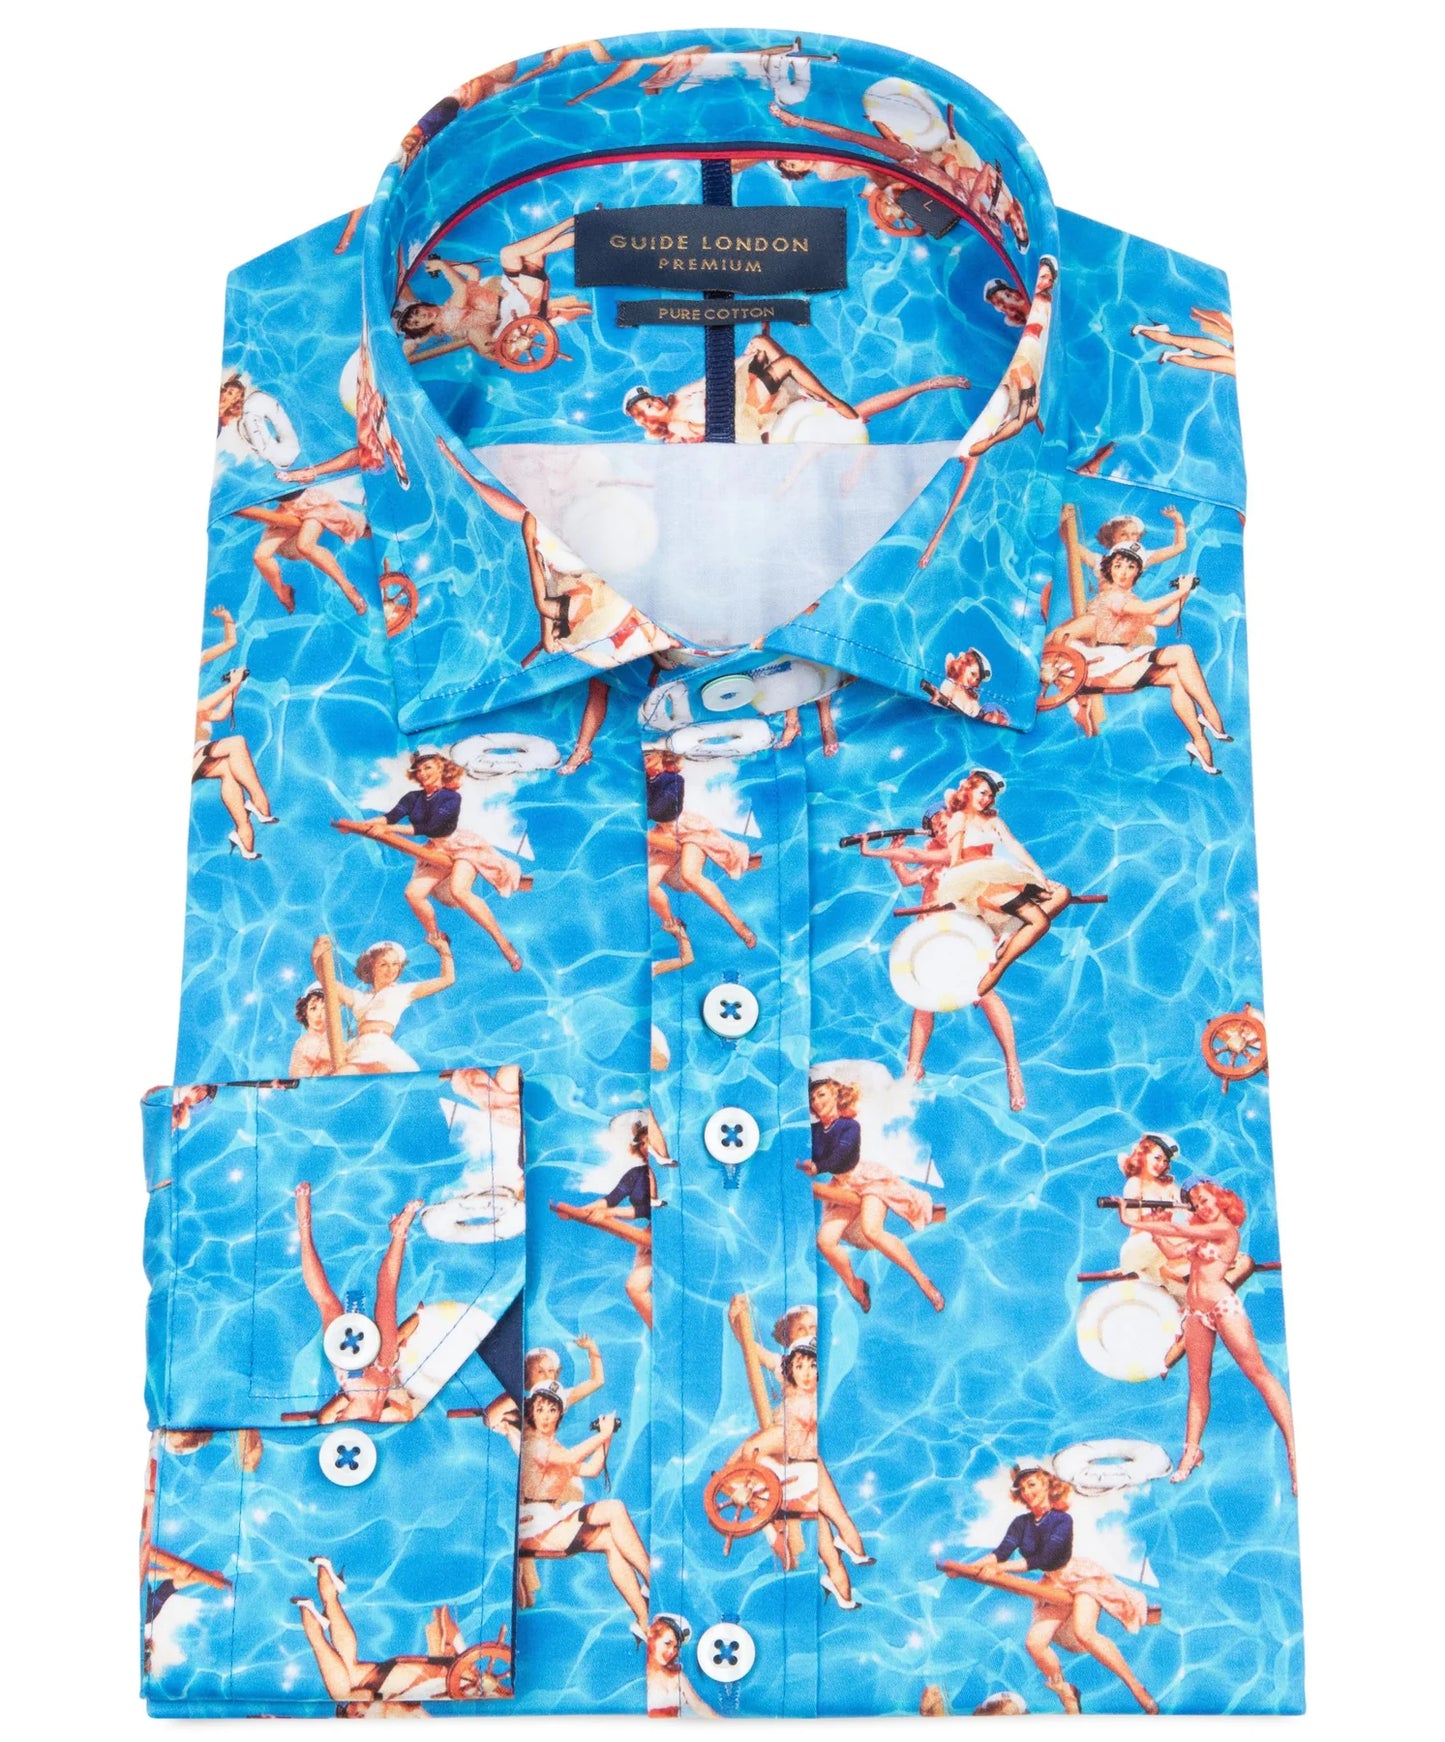 Guide London shirt with retro pin-up print and nautical theme